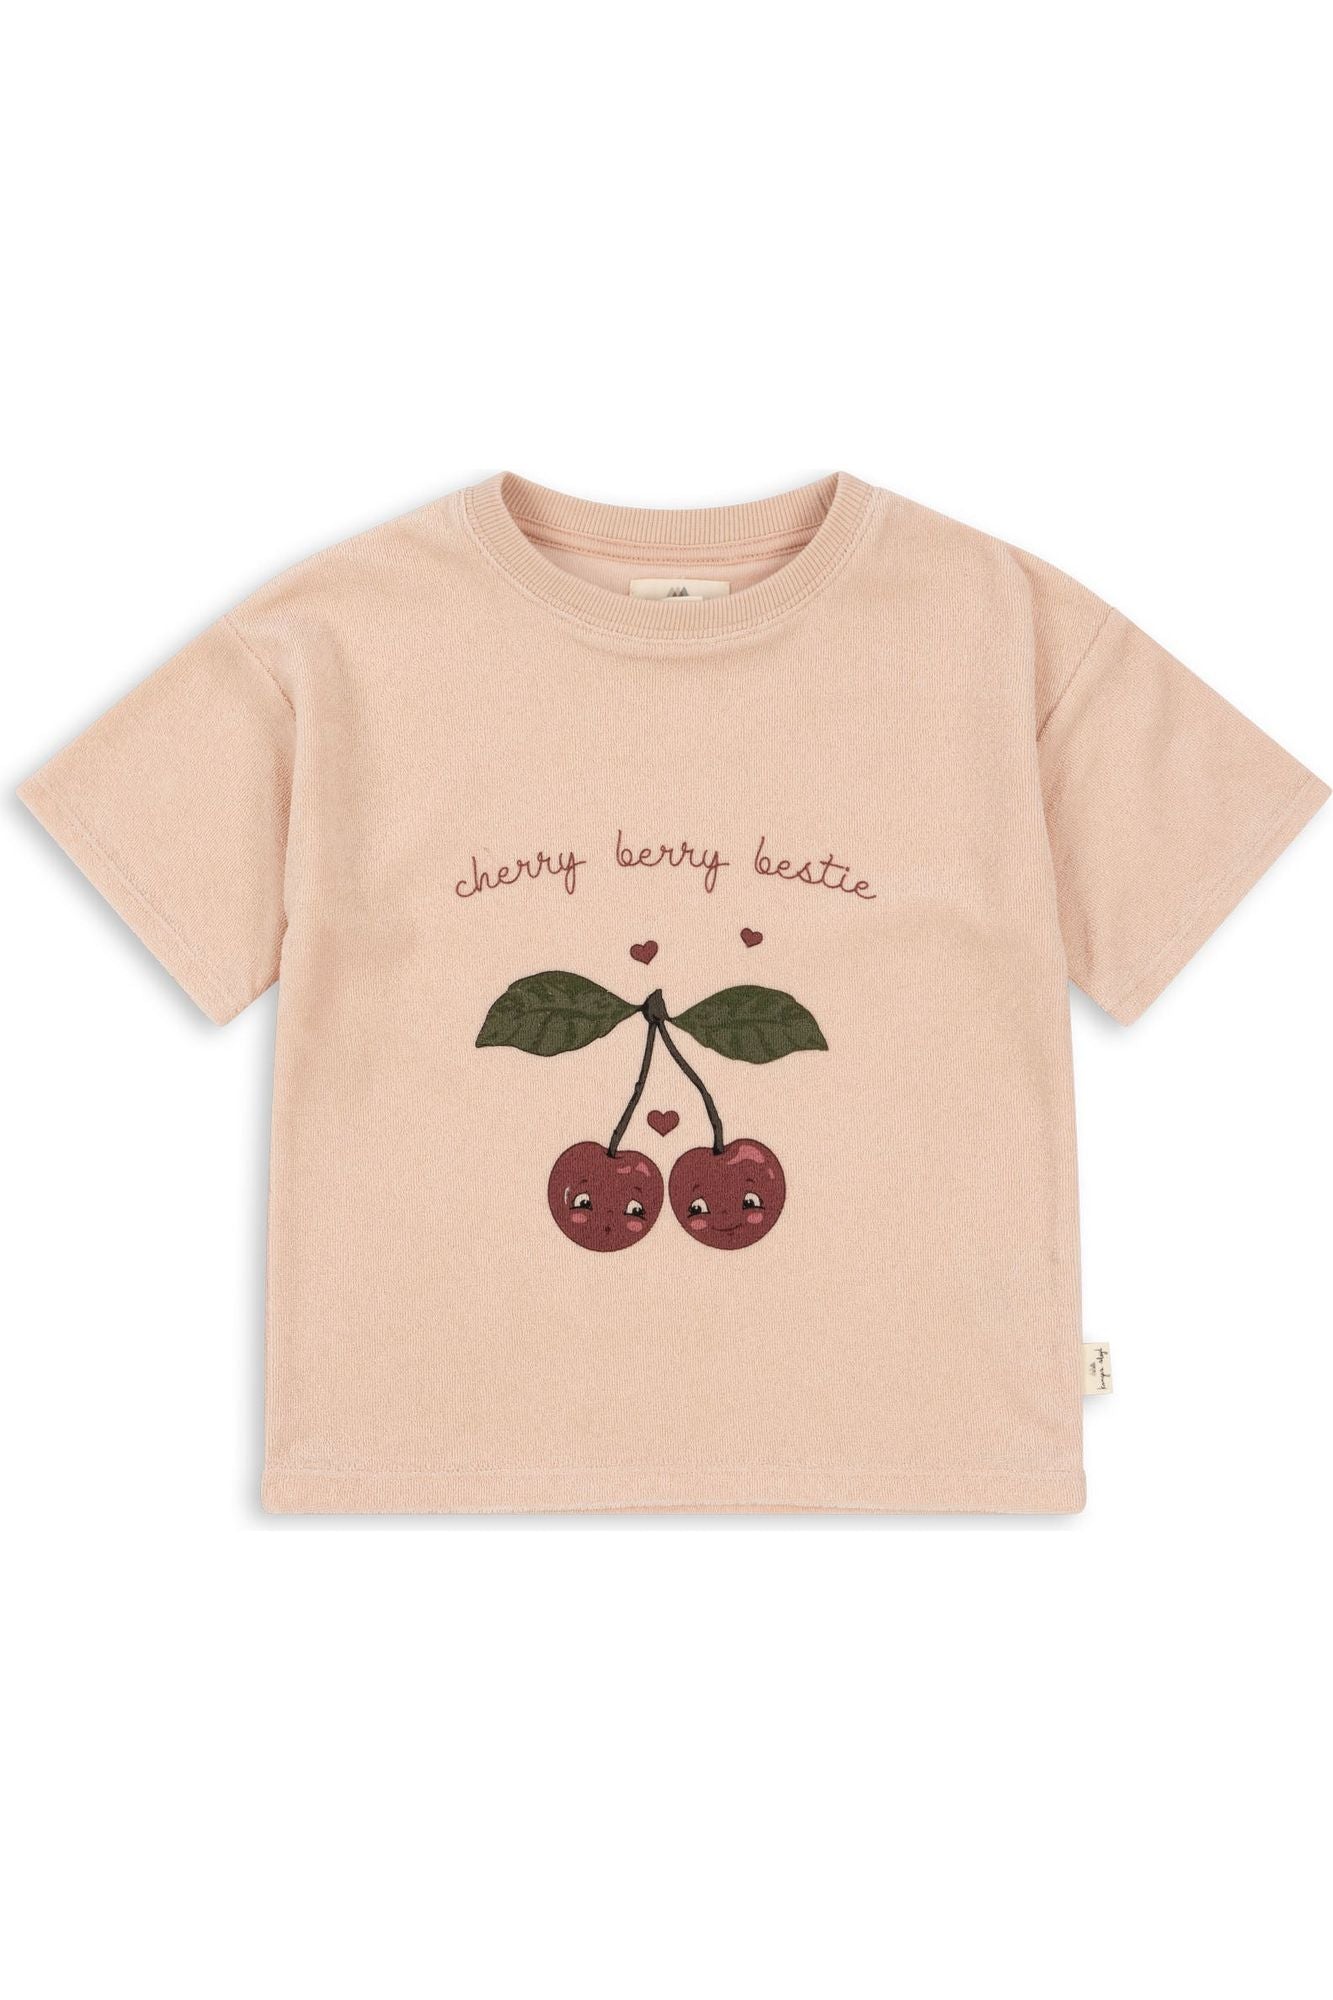 Itty Terry Cloth T-Shirt - Cameo Rose